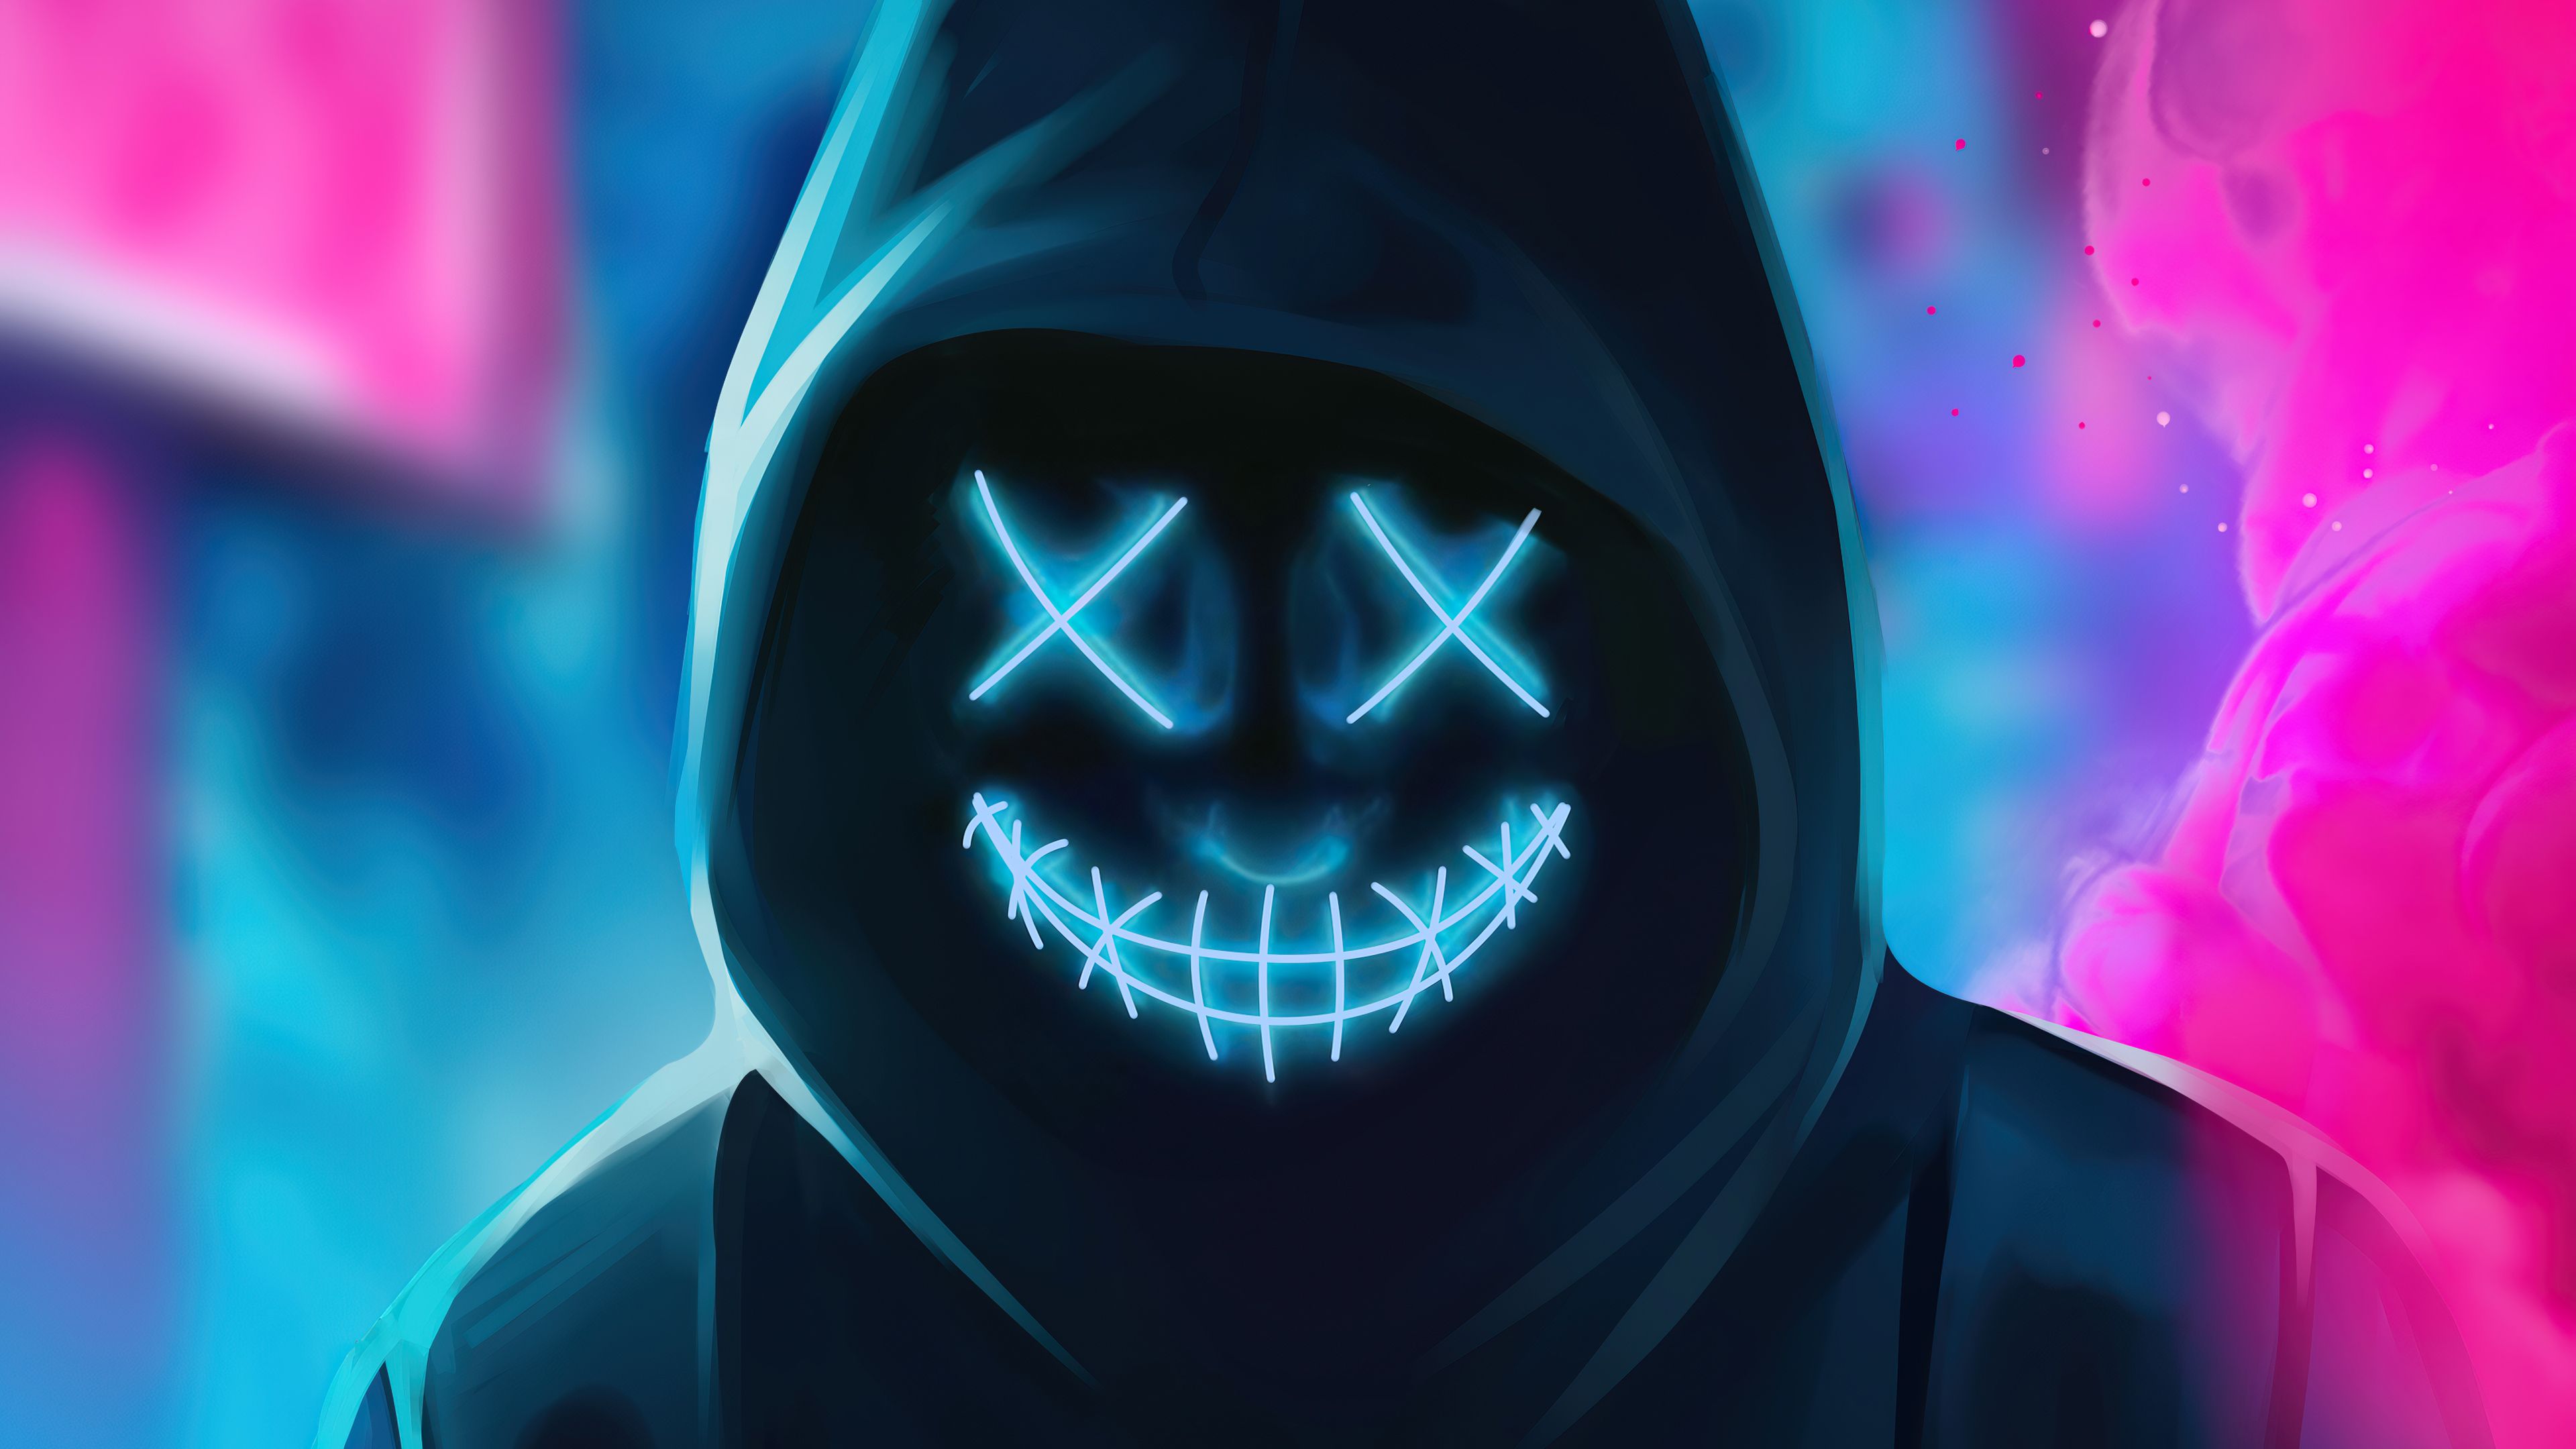 Neon Guy Mask Smiling 4k, HD Artist, 4k Wallpaper, Image, Background, Photo and Picture